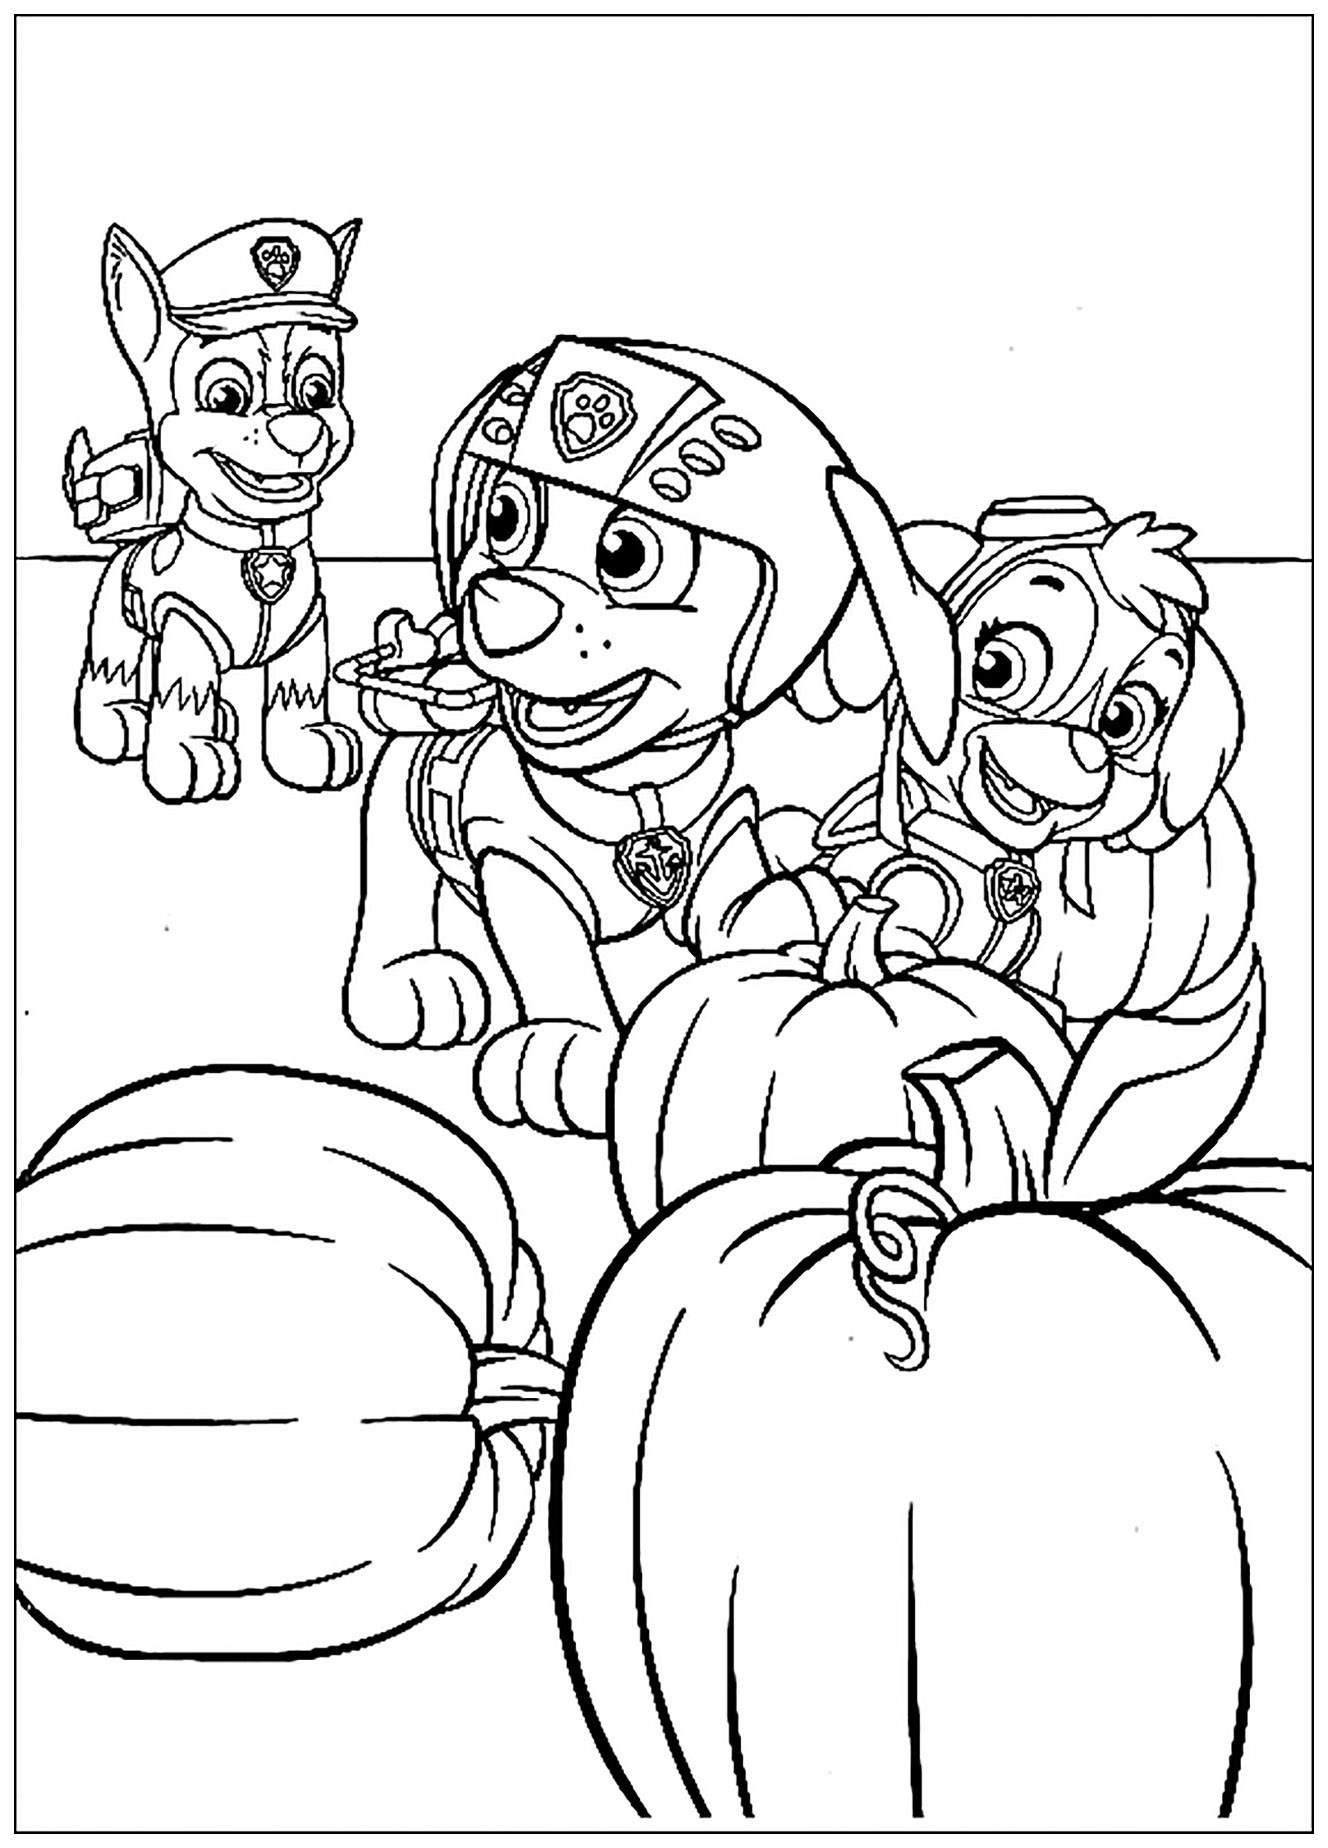 Paw Patrol Coloring Pages FREE Printable 60